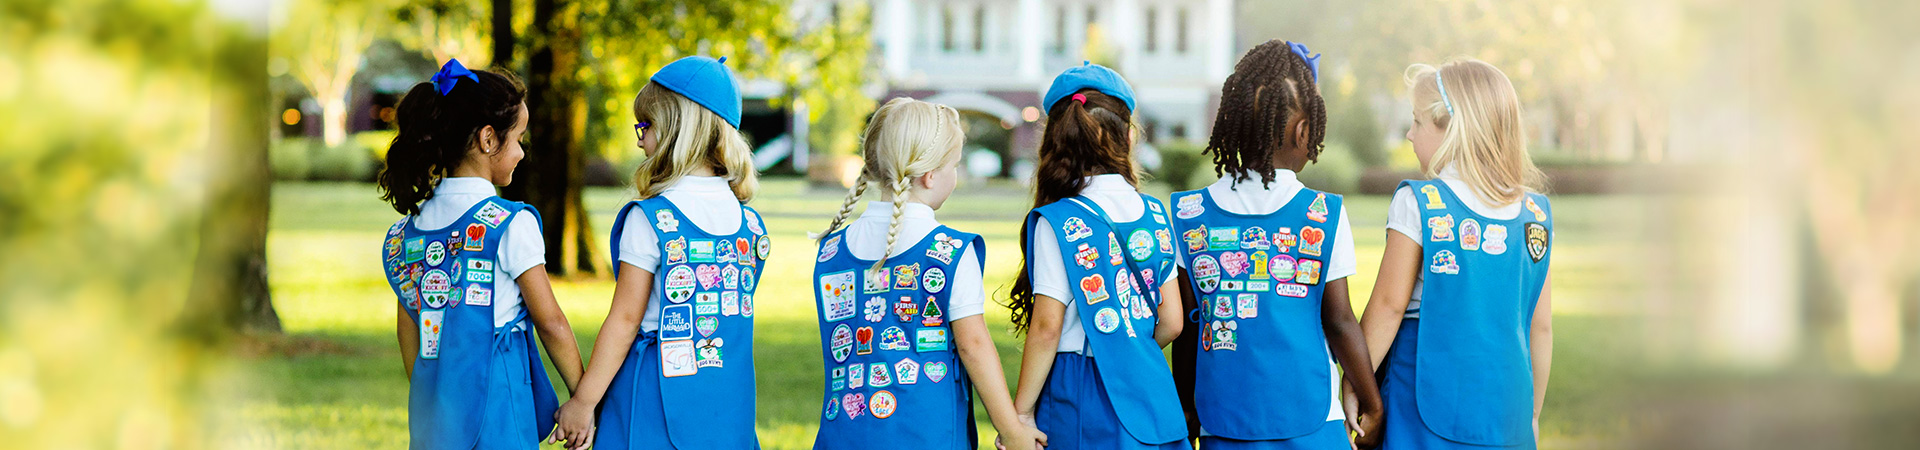  Daisy Girl Scouts holding hands and showing off their uniforms filled with patches 